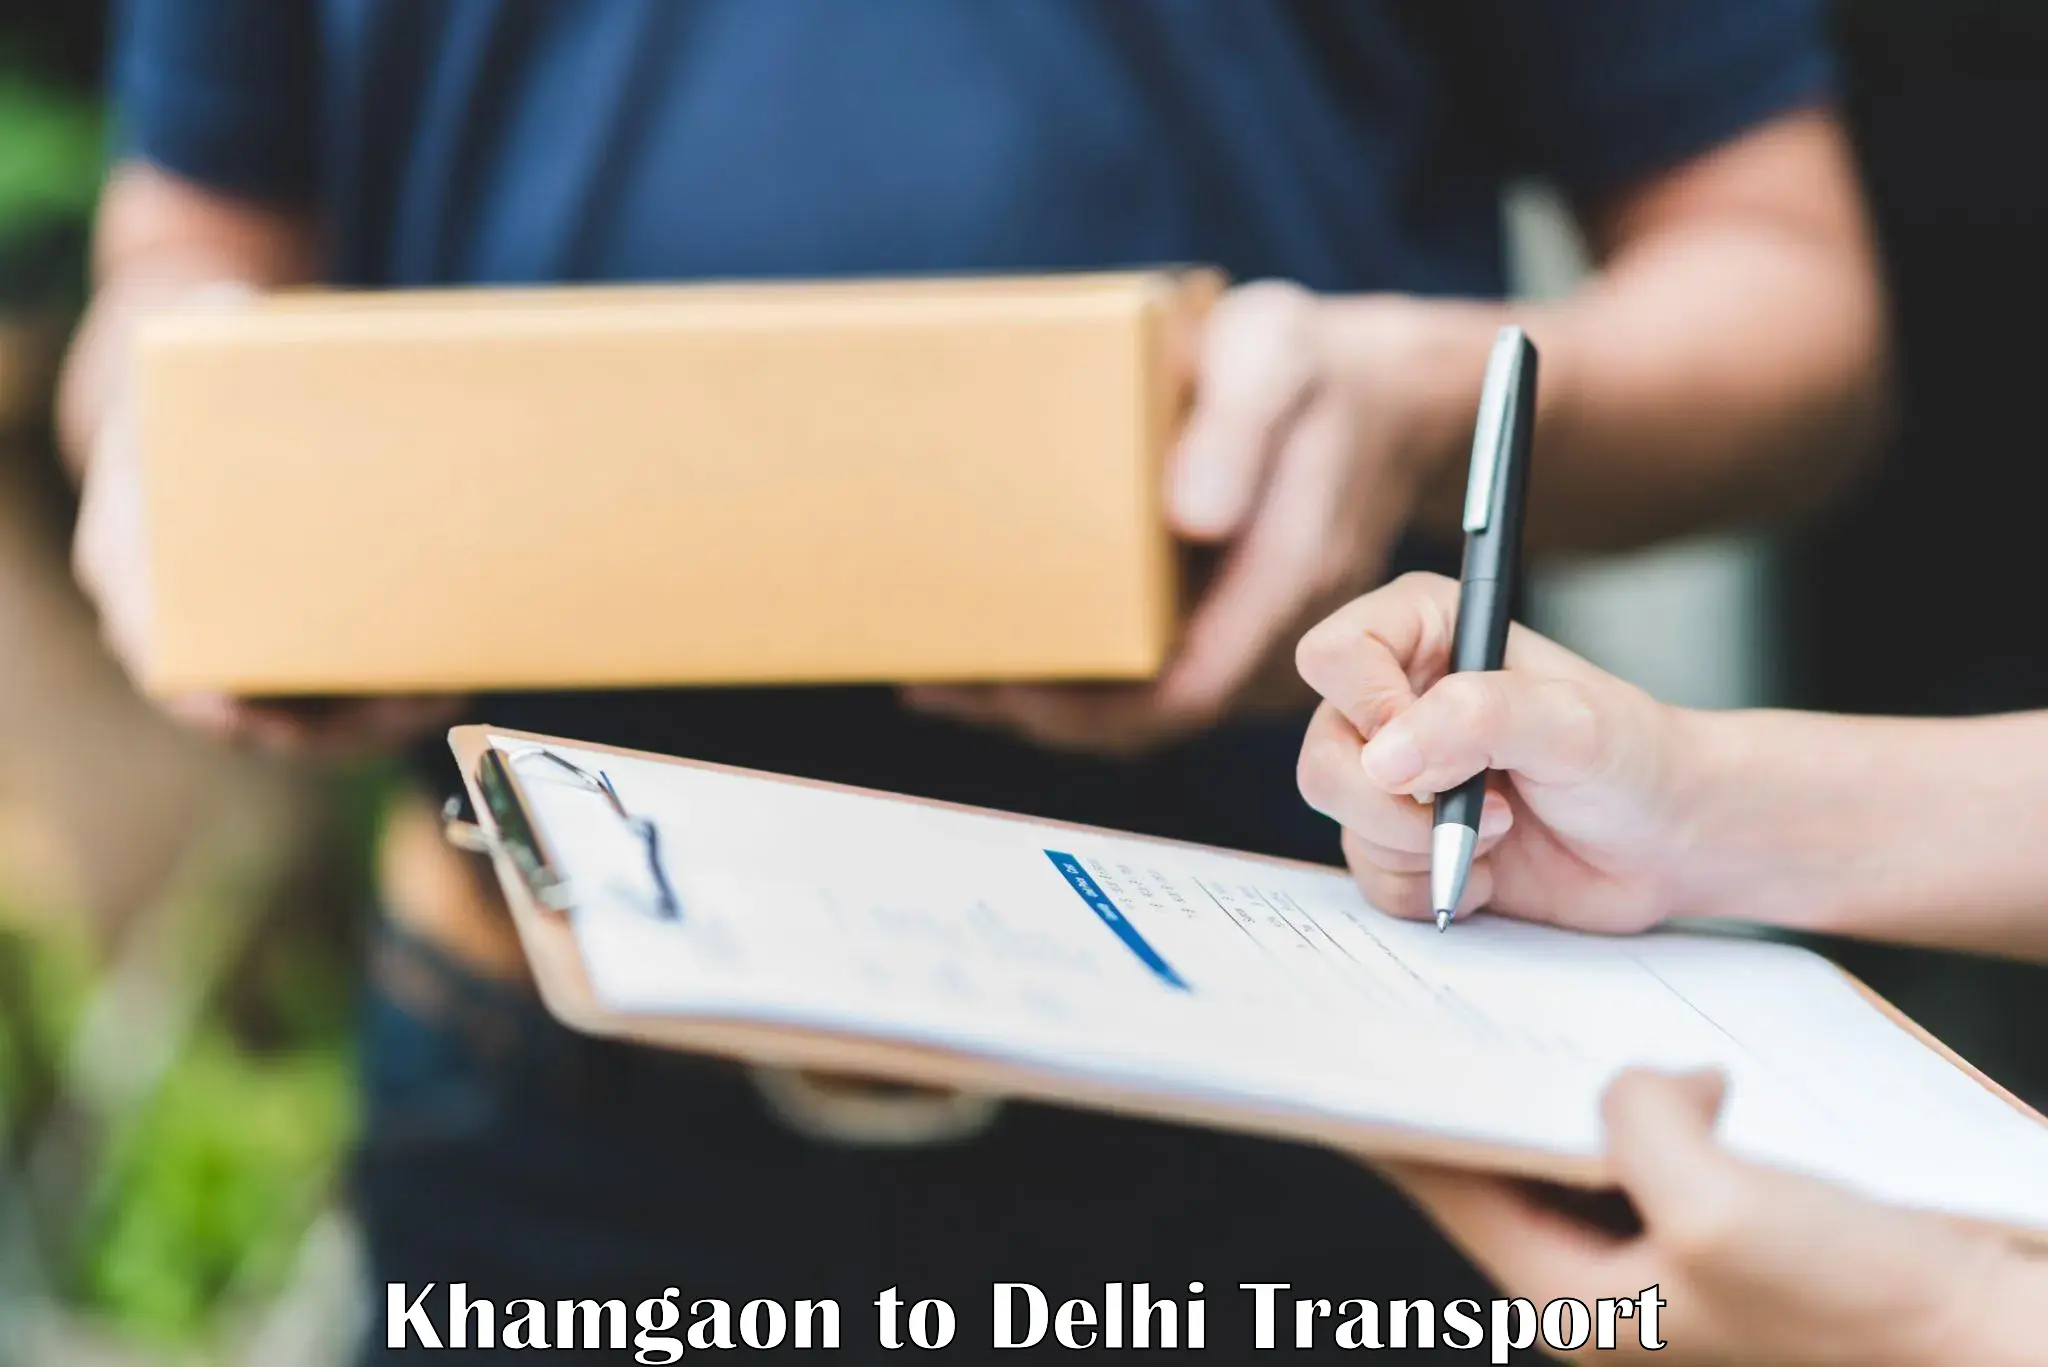 Transport bike from one state to another Khamgaon to NCR